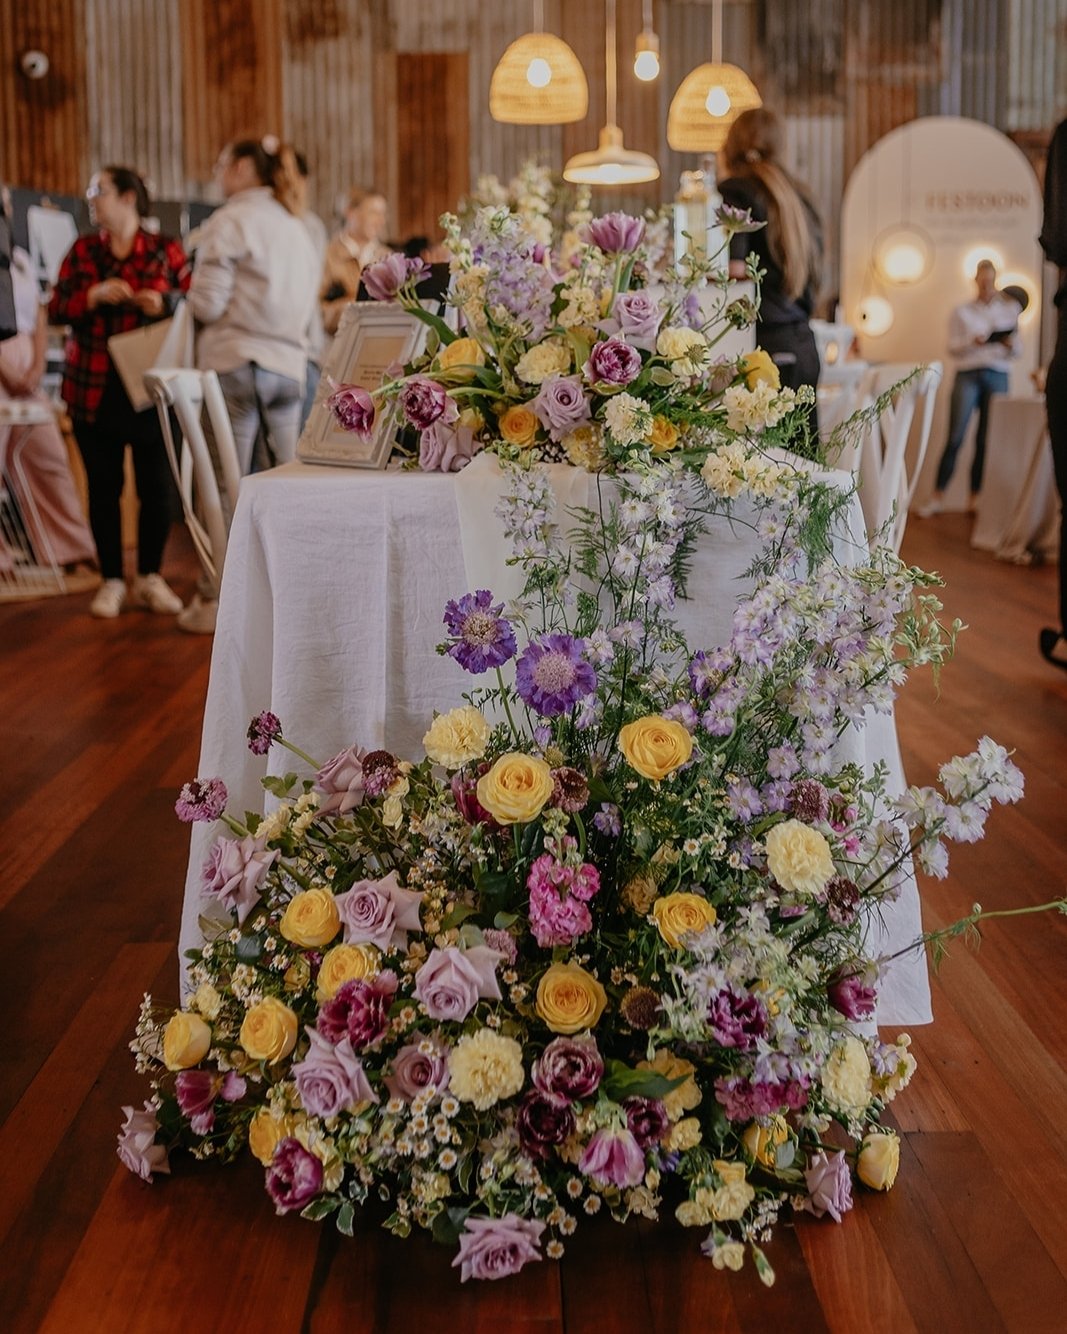 A moment of appreciation for this beauty by our 2023 sponsor @scentiment_flowers 🤩

@placeoflove.photoandfilm
@scentiment_flowers
@sweventstudio
@festoon_lighting

#welovelove #fromthisday #wedding #southwestwedding #marrydownsouth #margaretriver #d